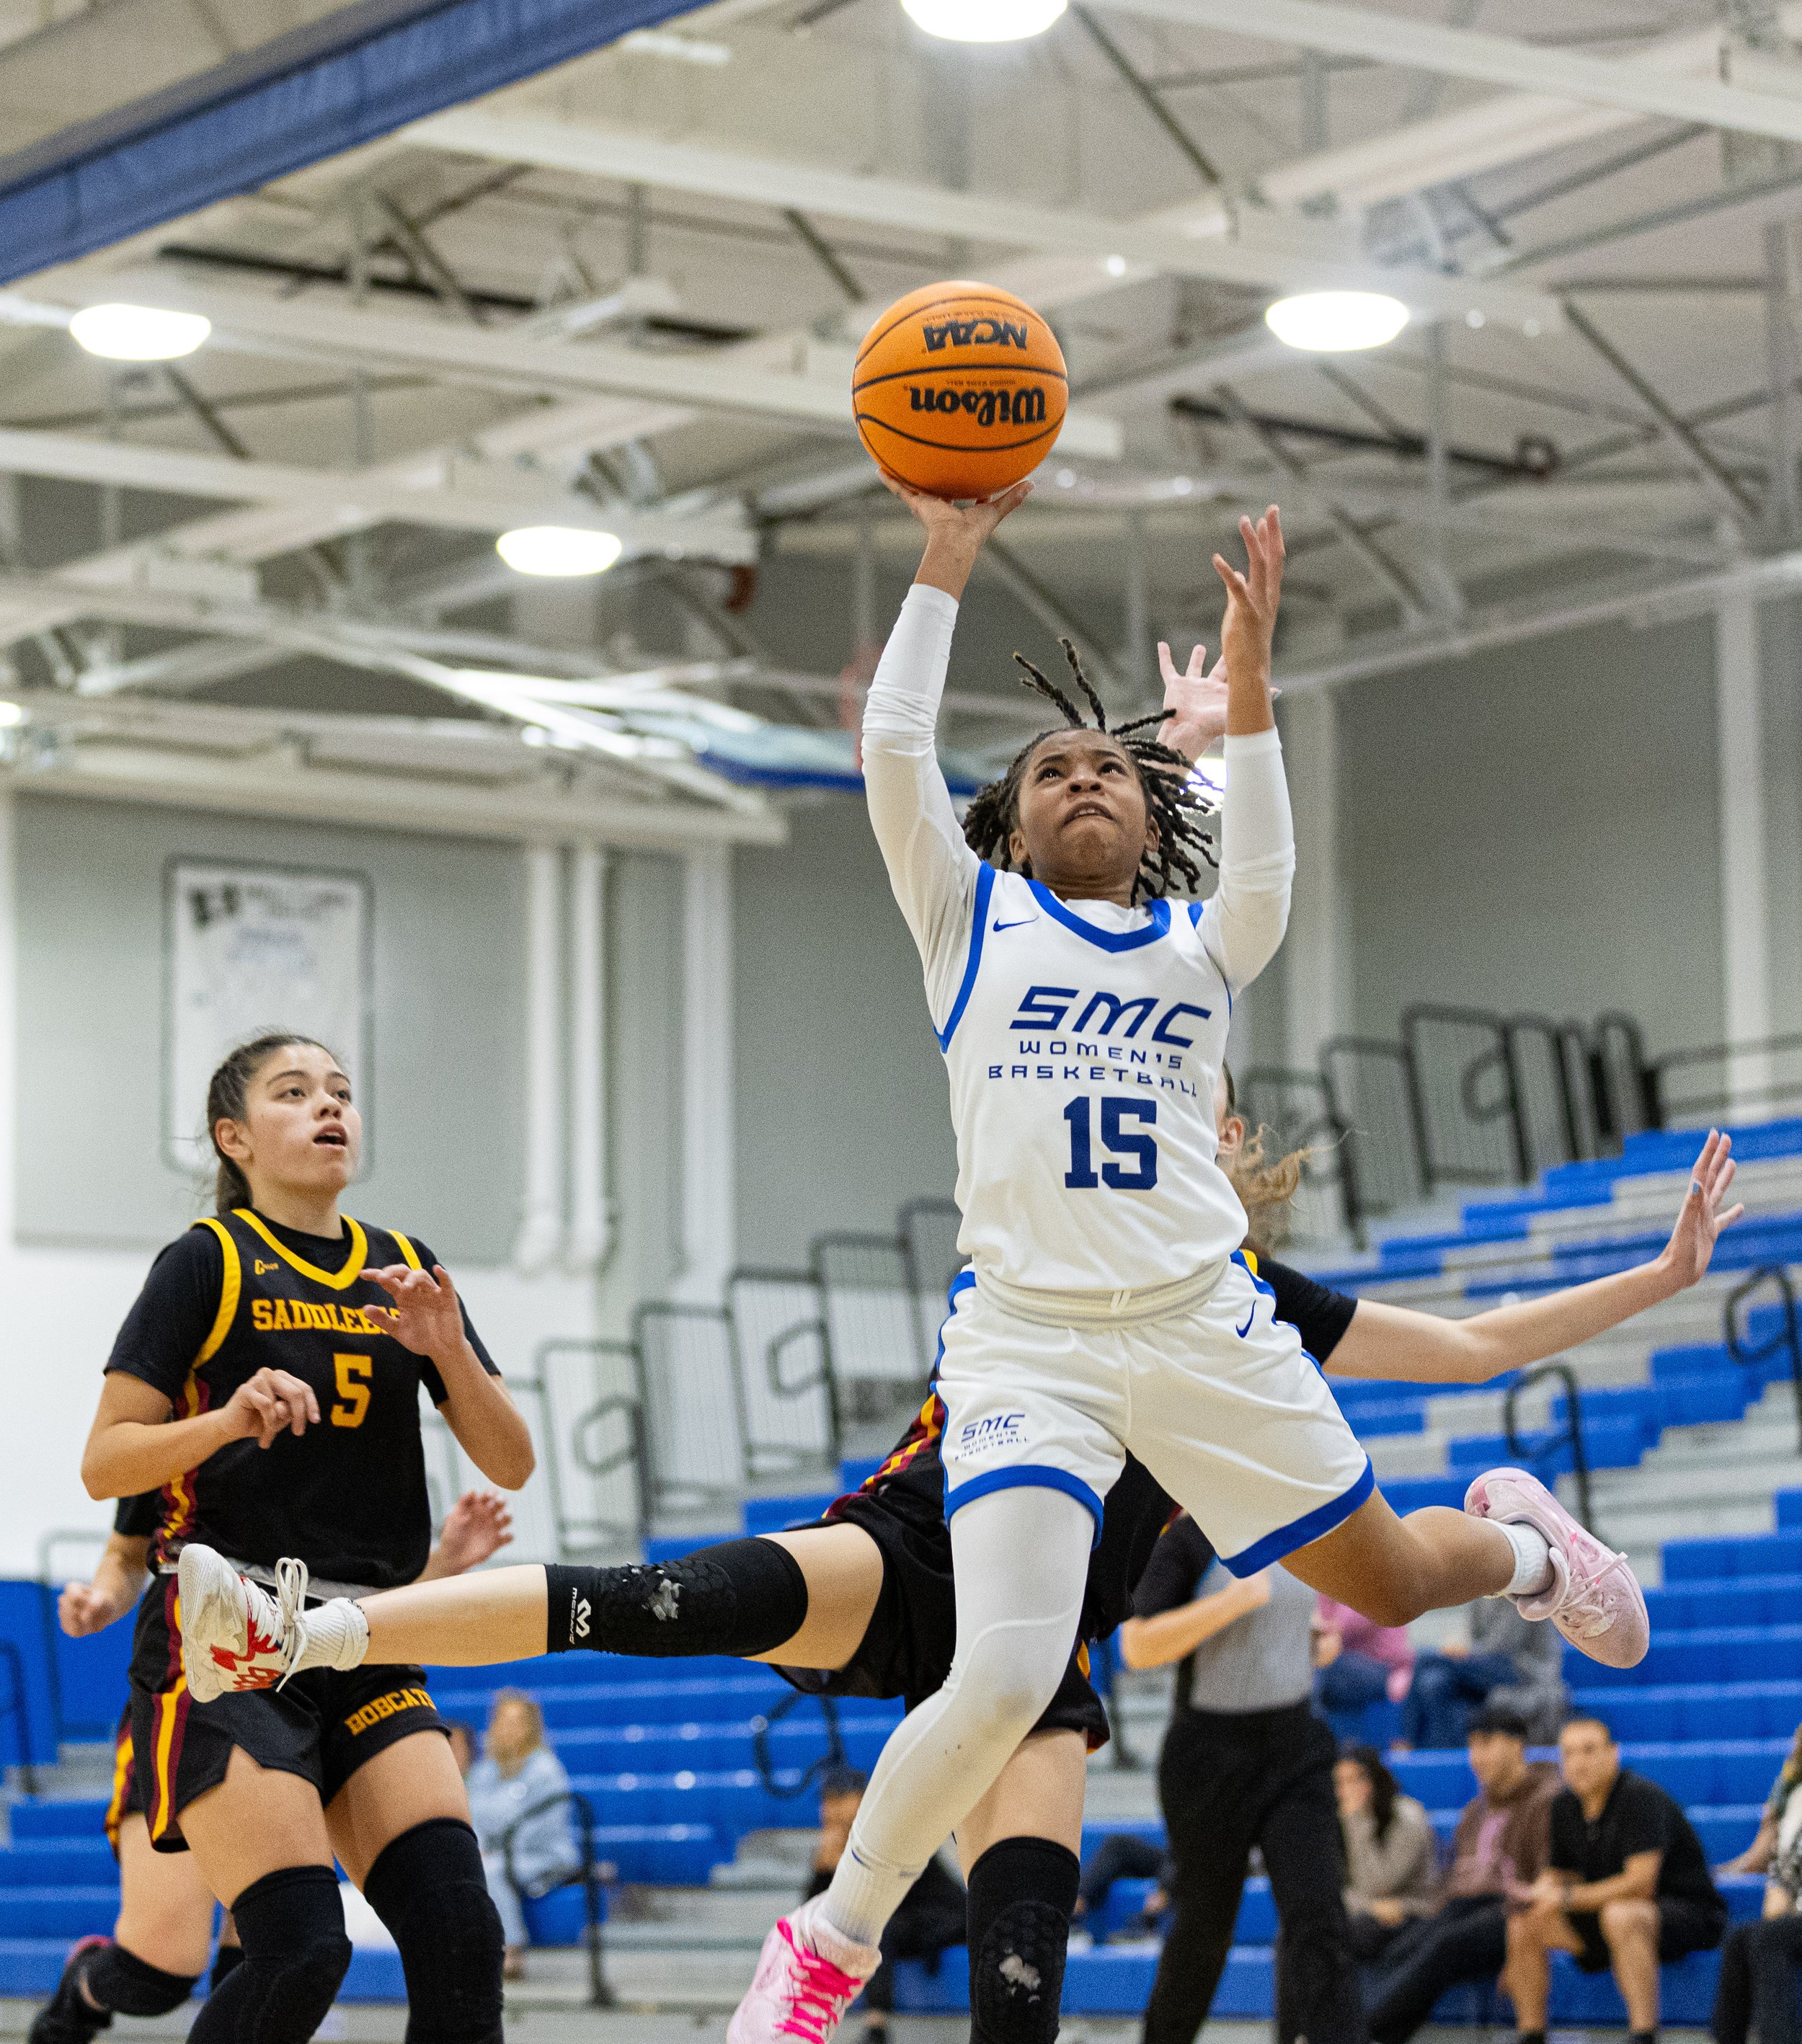  Corsair guard Jayahne Henderson(15) from Santa Monica College(SMC) getting passed Saddleback College Bobcat players for the layup in the SMC Pavillion Gym at Santa Monica, Calif. Corsairs lost 62-50 to put them in a 3-game losing streak on Tuesday, 